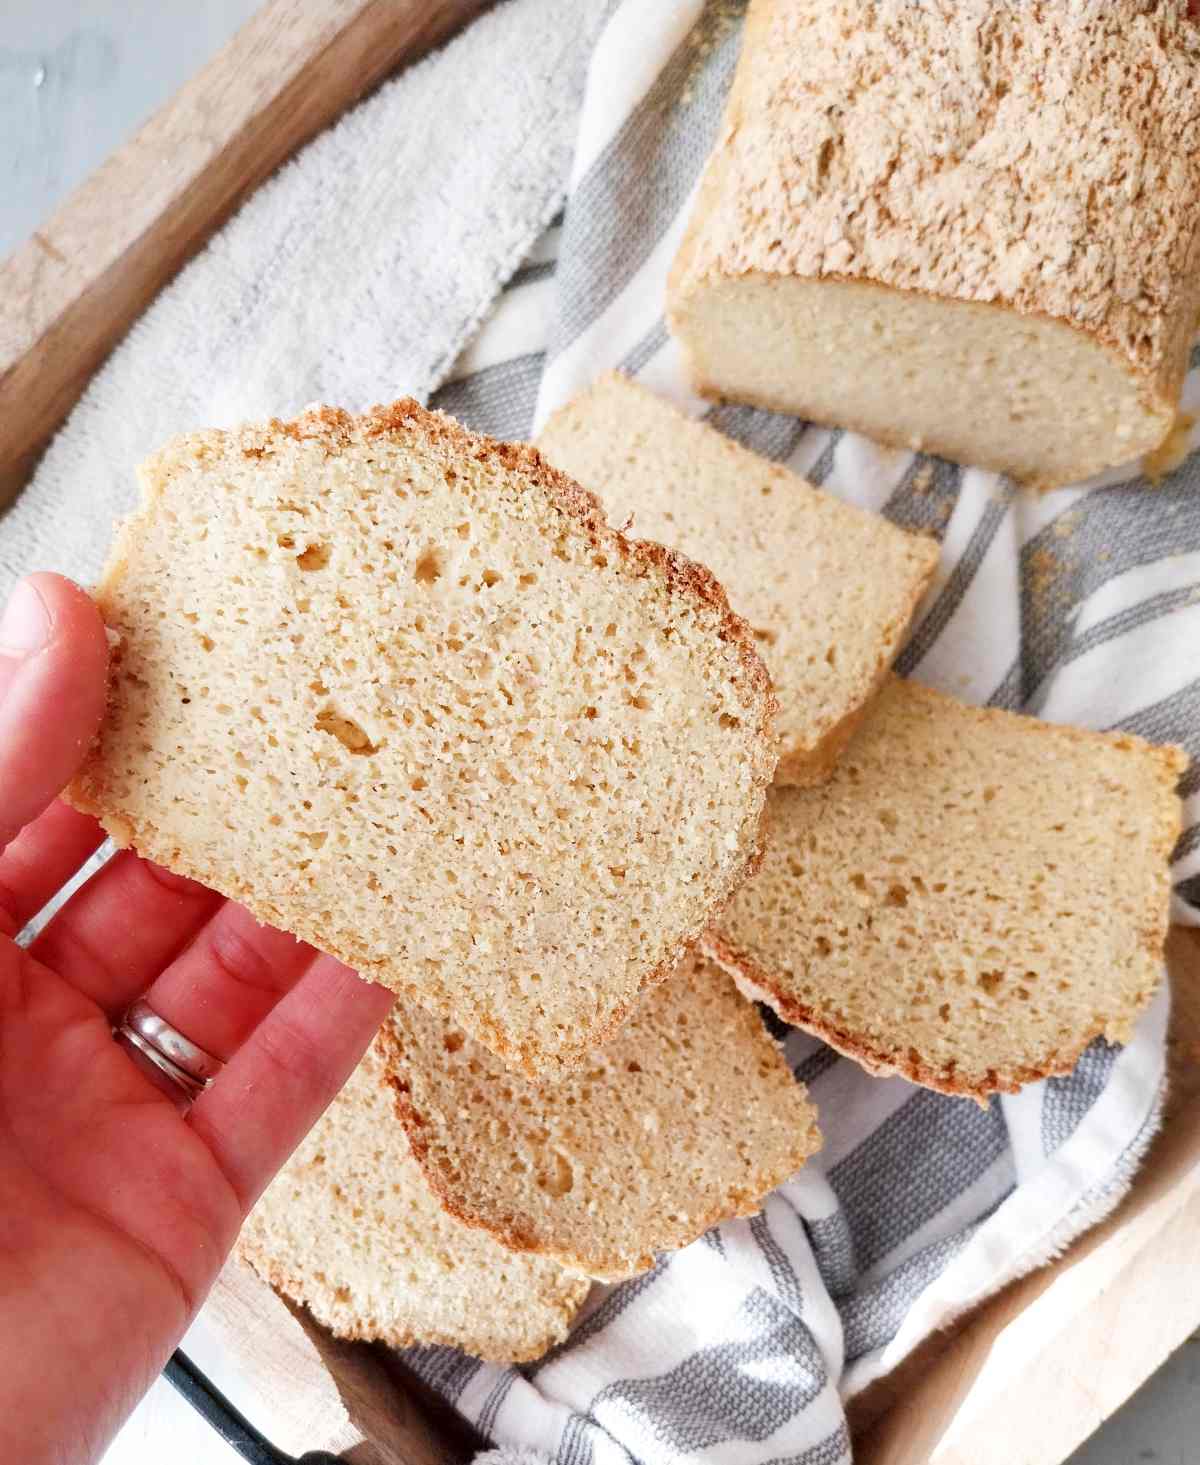 A slice of millet bread held by a hand with the bread in the background.